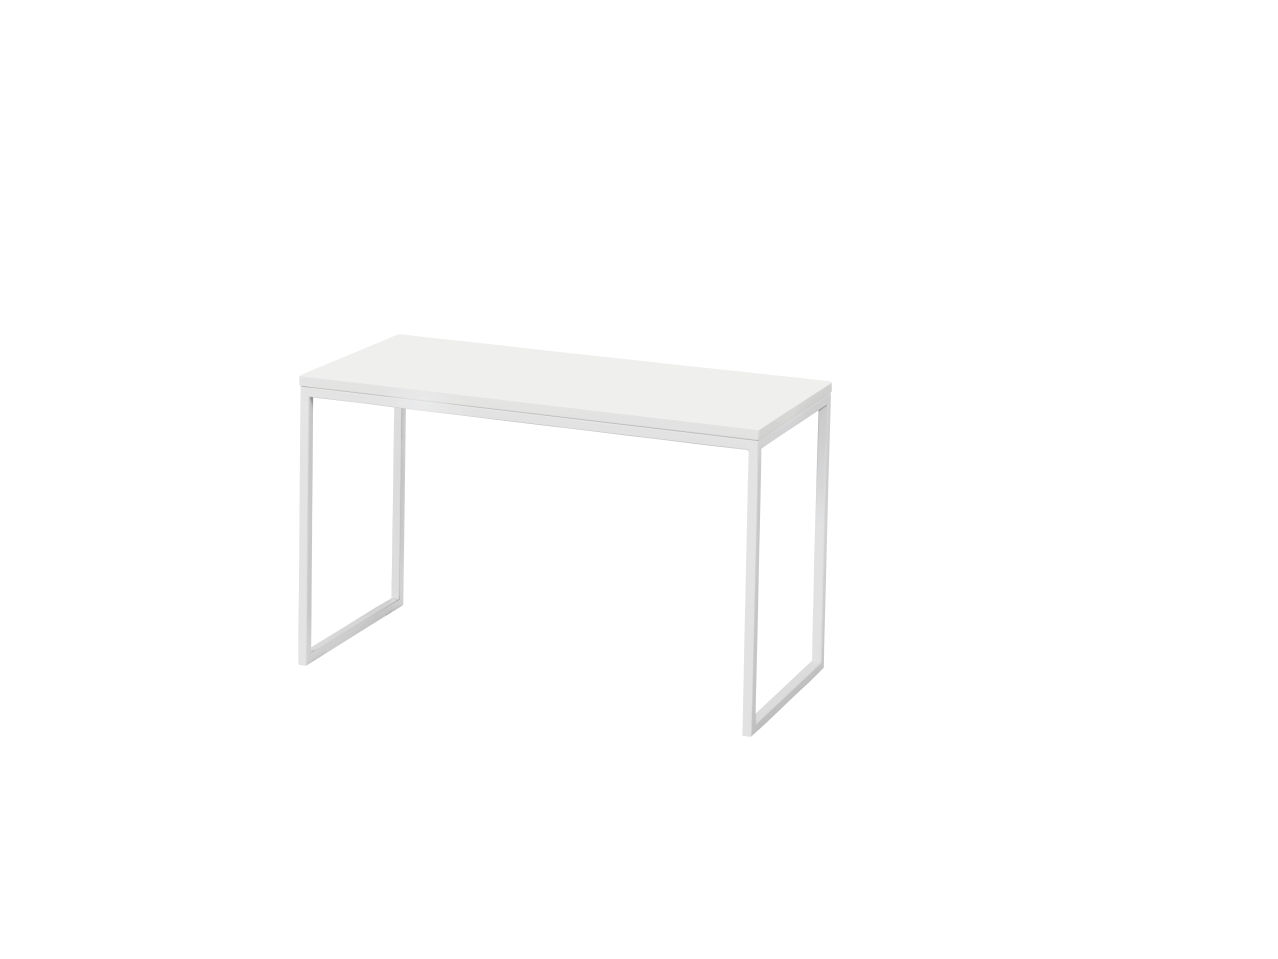 now! by hülsta. coffee tables | Couchtisch CT 17-1 | H: 43,4 cm | B: 70,6 cm | T: 32,1 cm